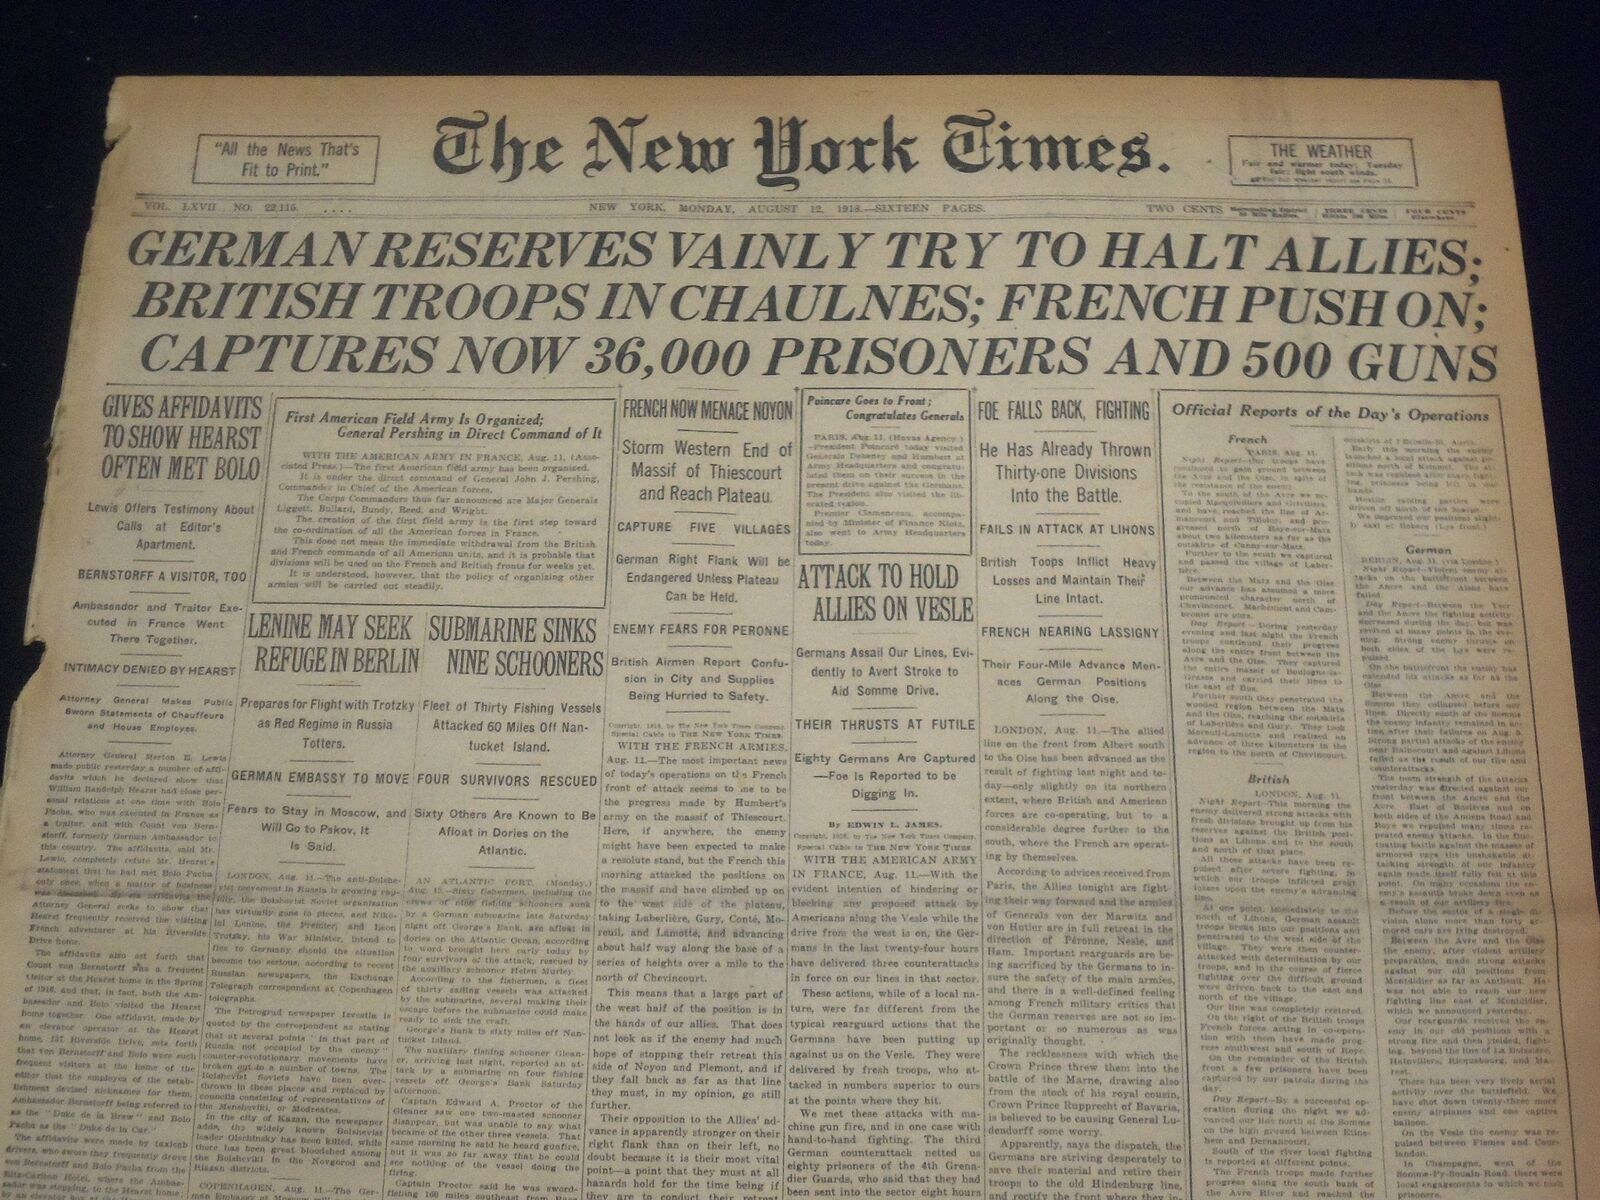 1918 AUGUST 12 NEW YORK TIMES - GERMANS VAINLY TRY TO HALT ALLIES - NT 9192